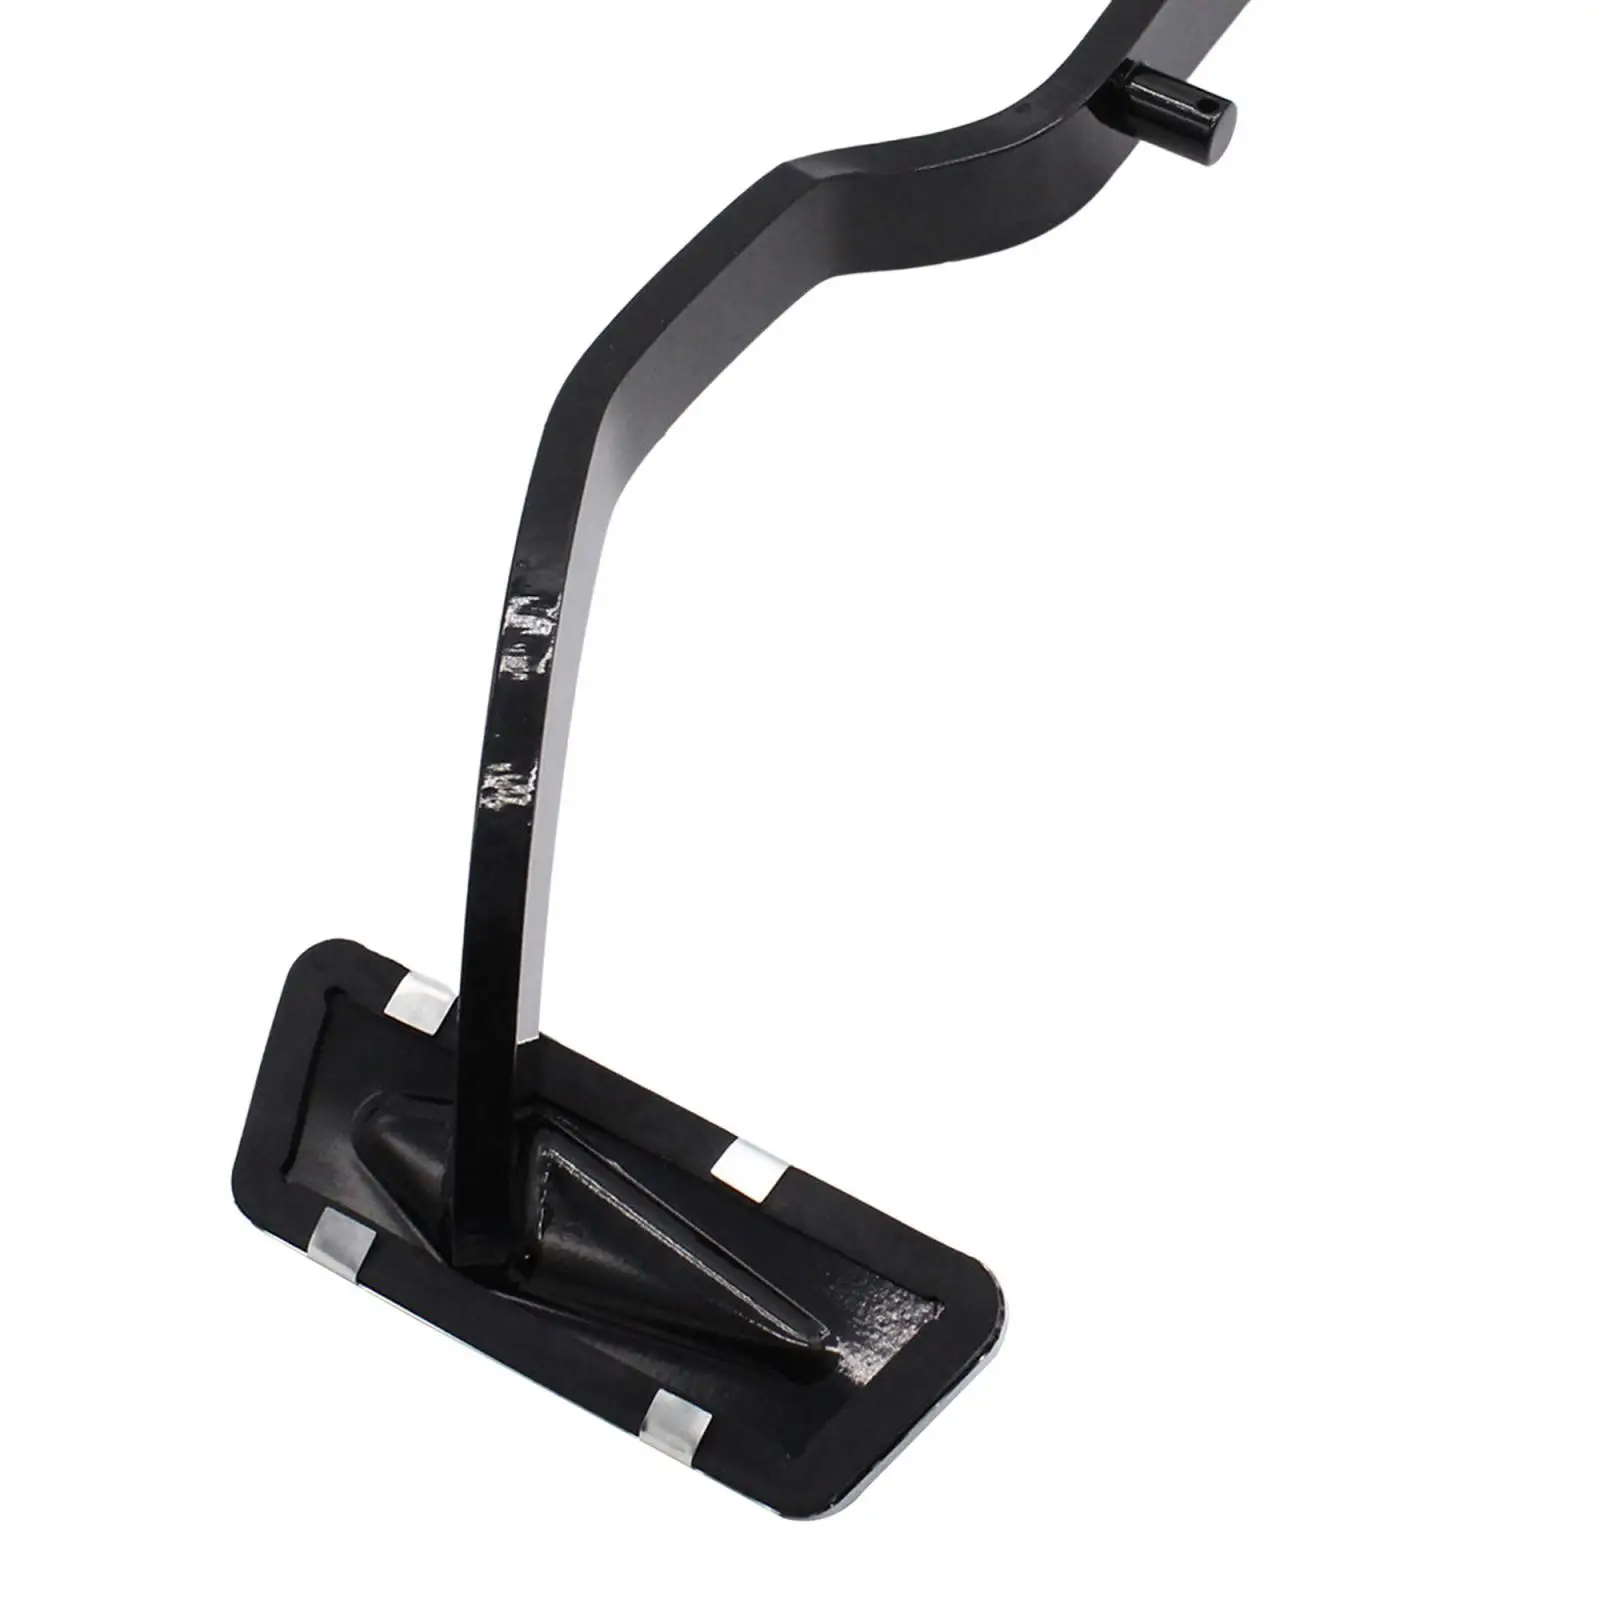 

Car Brake Pedal Arm with Automatic Transmission B10520 Black for Ford Mustang 1967-69 Replace Parts Easy Installation